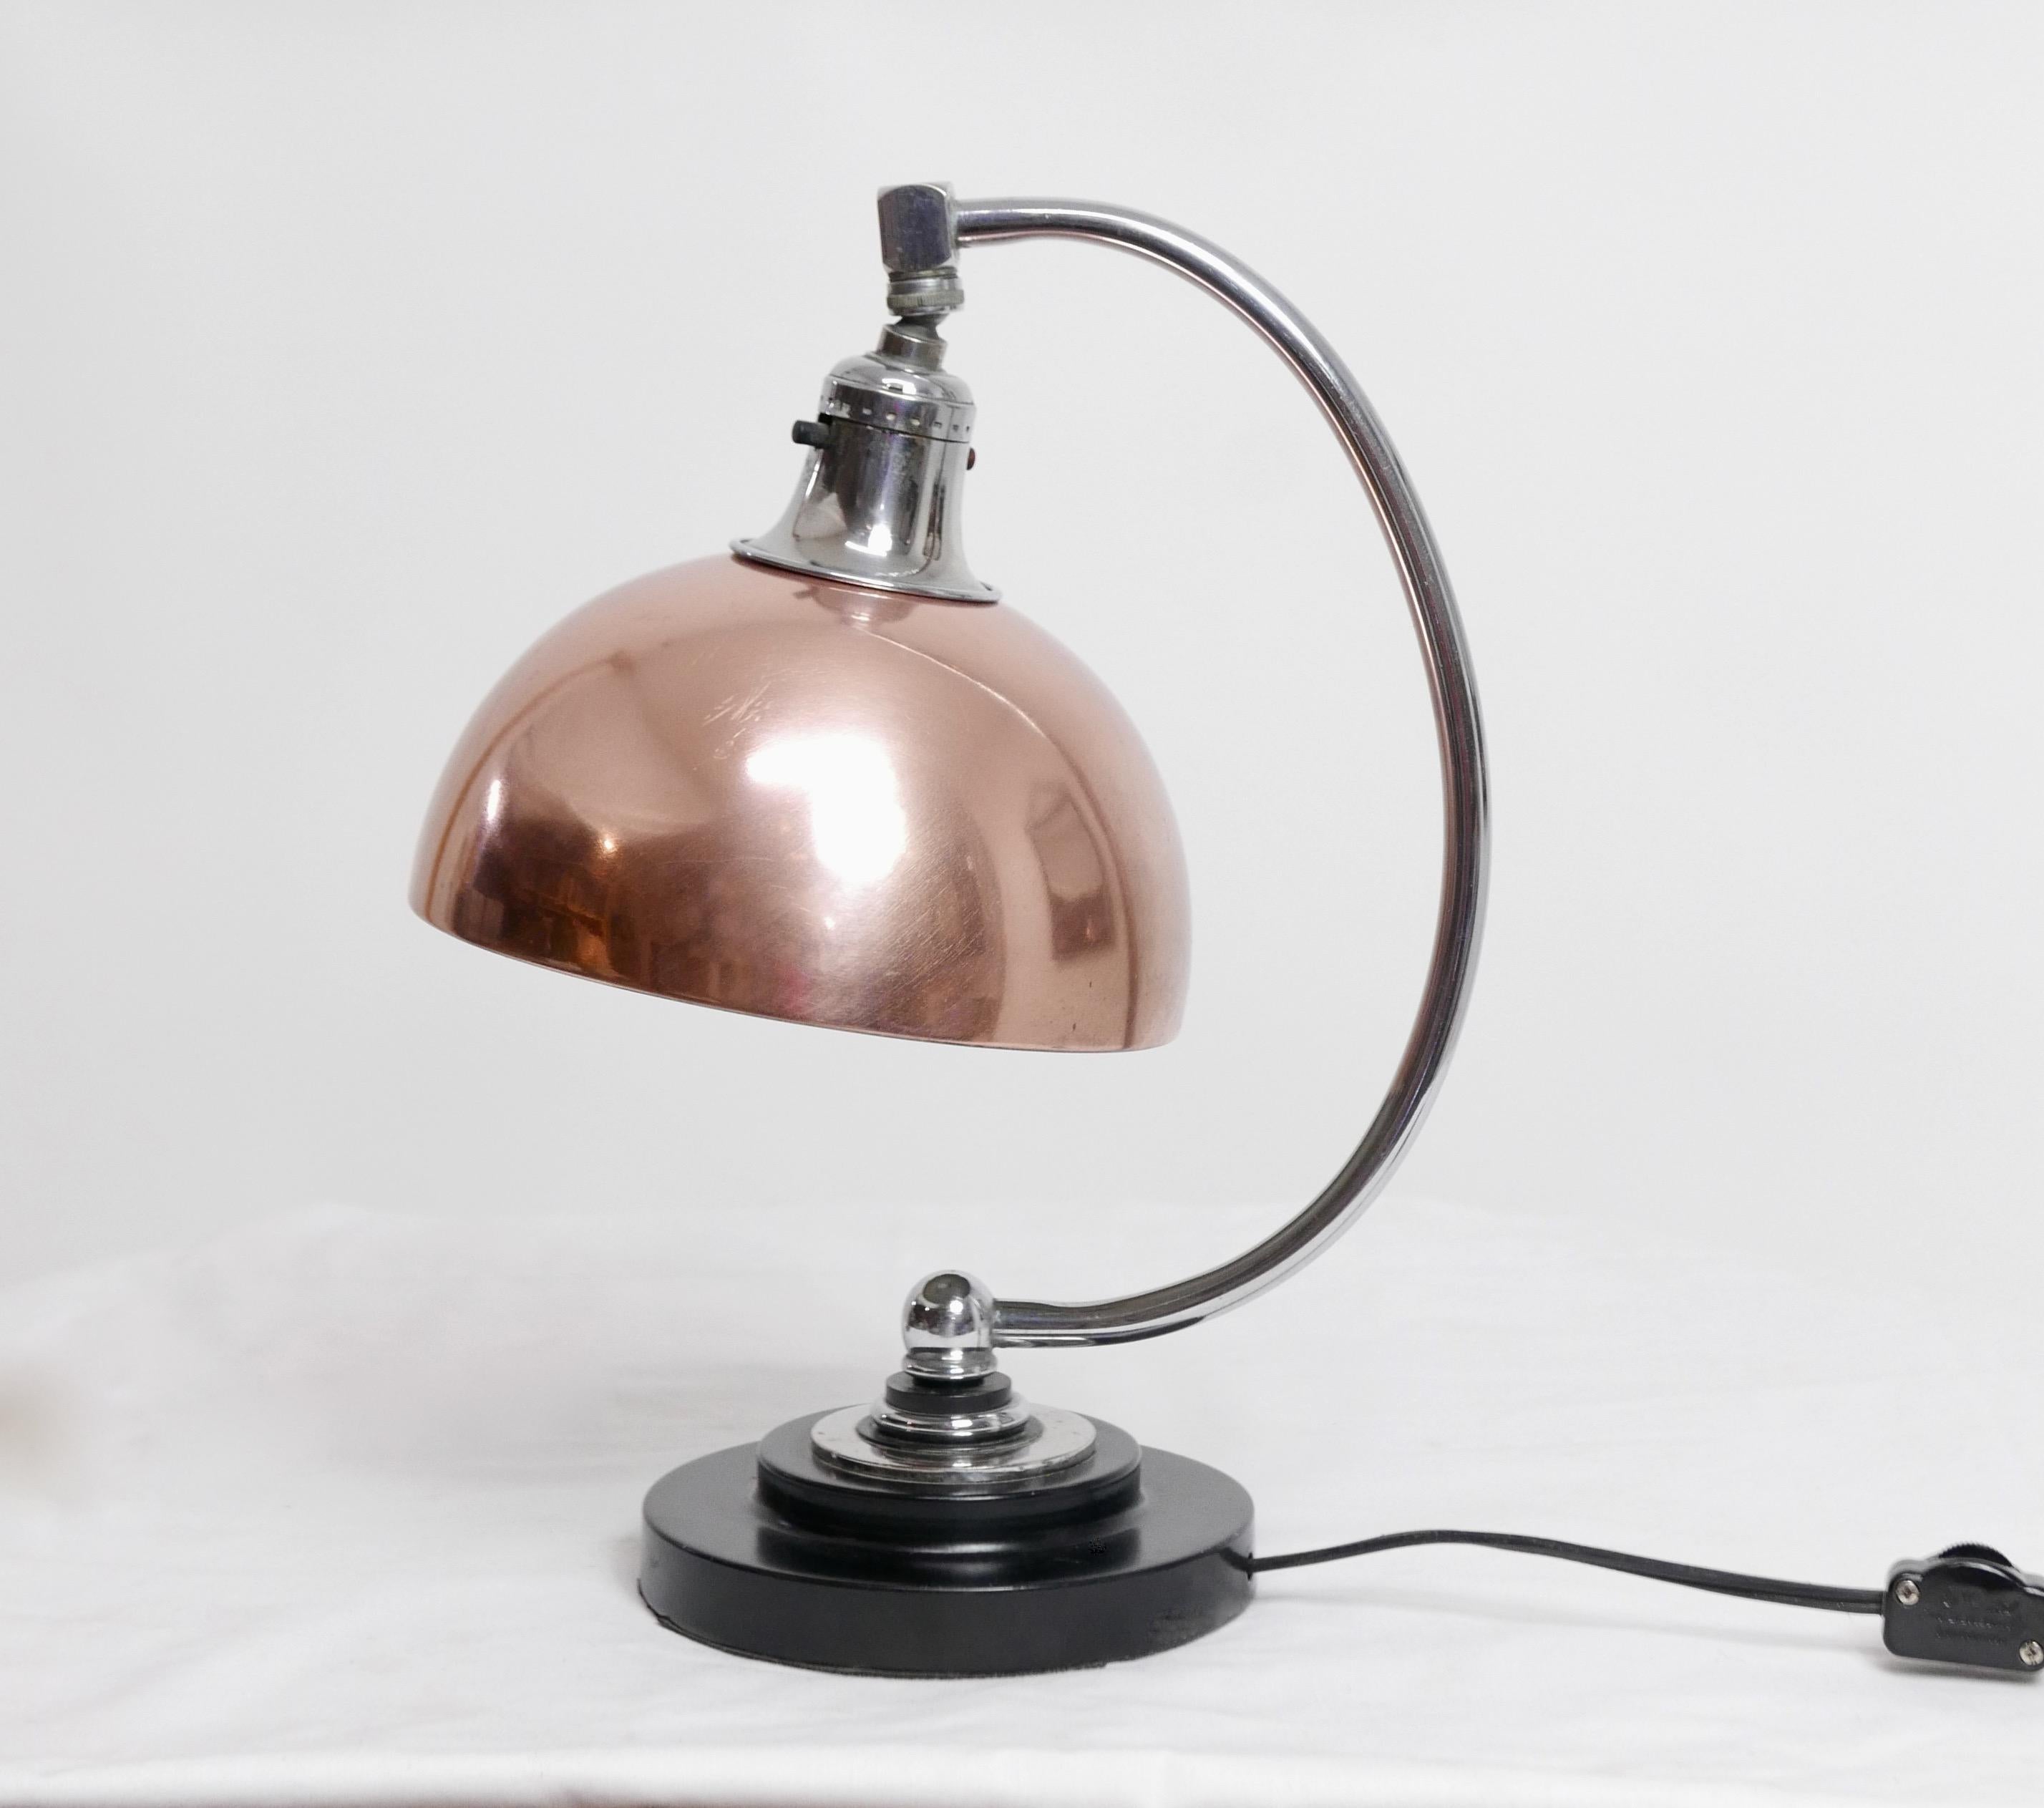 Original Art Deco period chrome and copper desk lamp with painted steel base.
American 1930s-1940s
Recently re-wired.